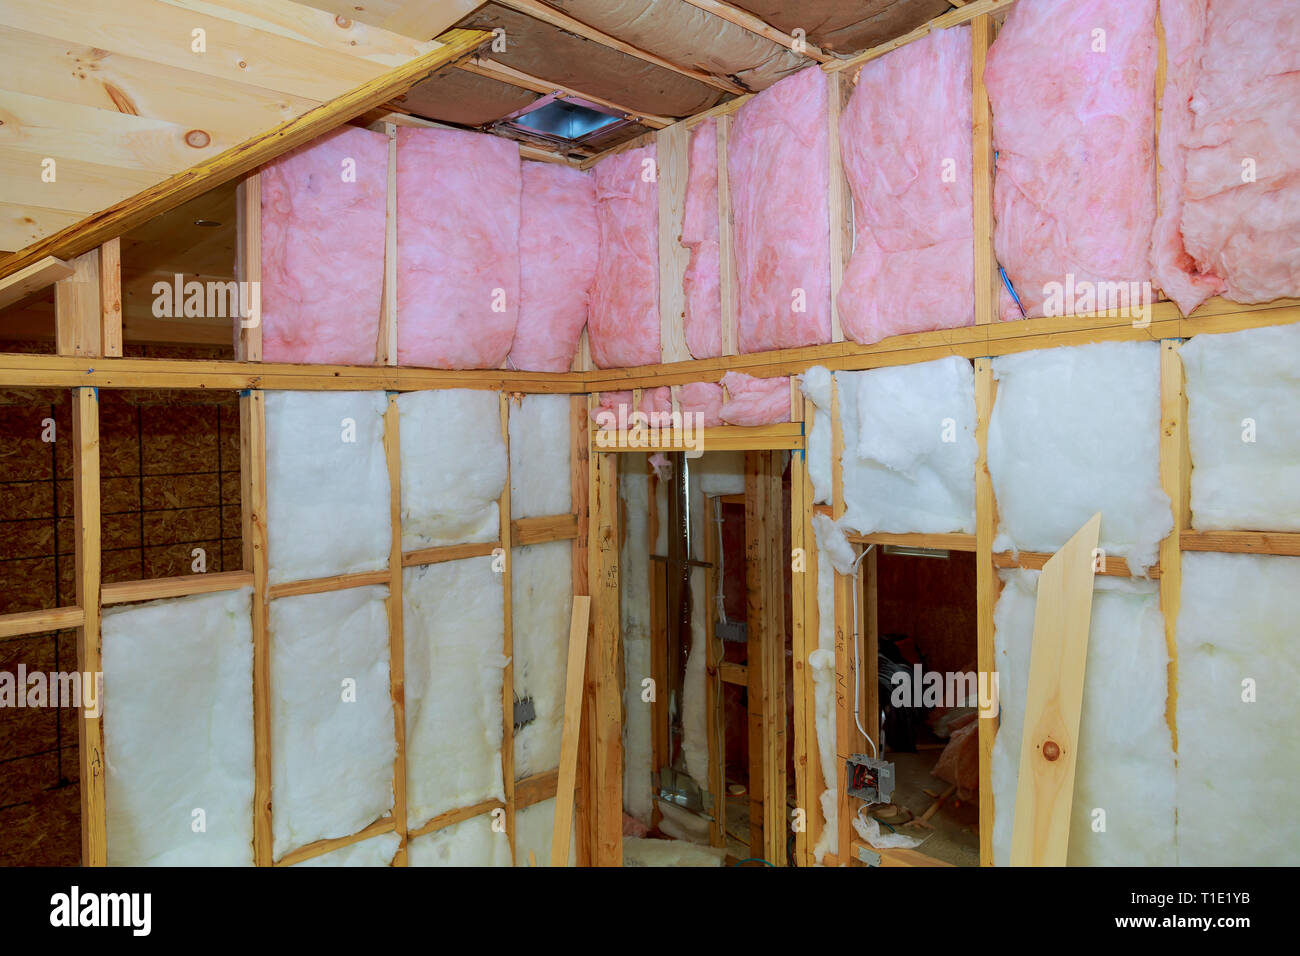 Closeup Of Roll Of Fibreglass Insulation Material On White Stock Photo -  Download Image Now - iStock